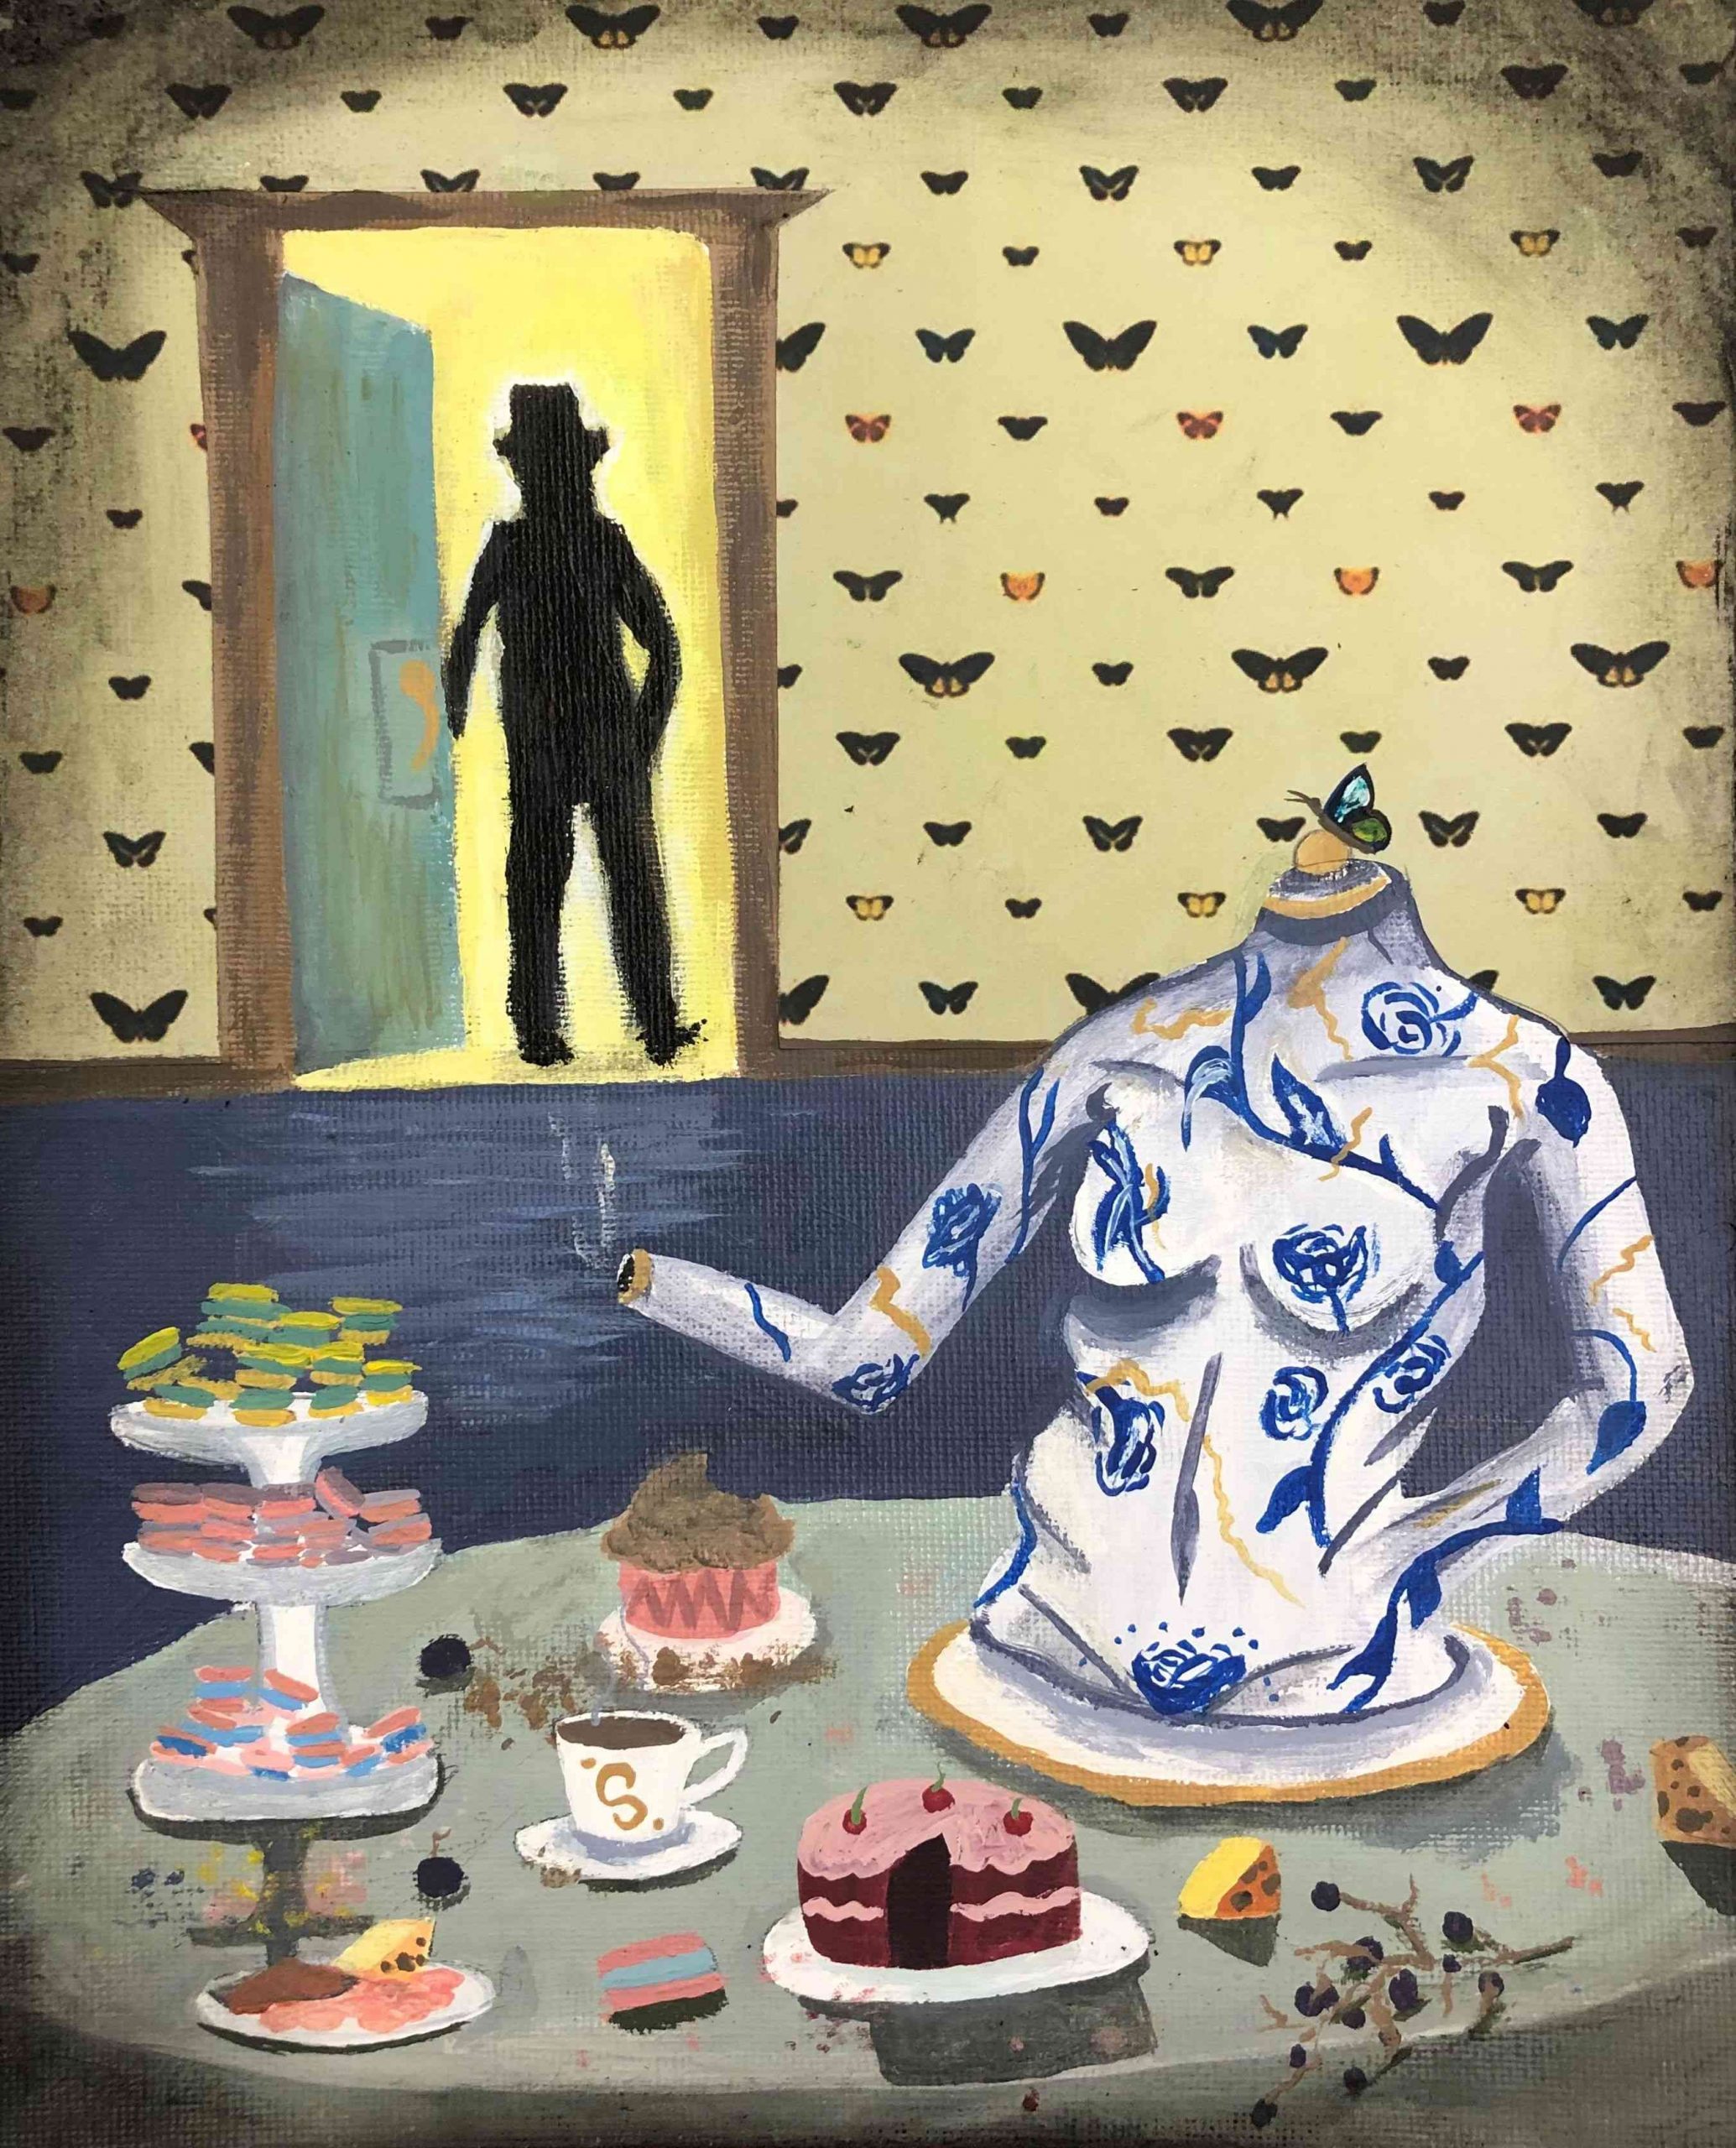 A painting where a dark male figure is leaving the table with pastries and a statue of a woman\'s body